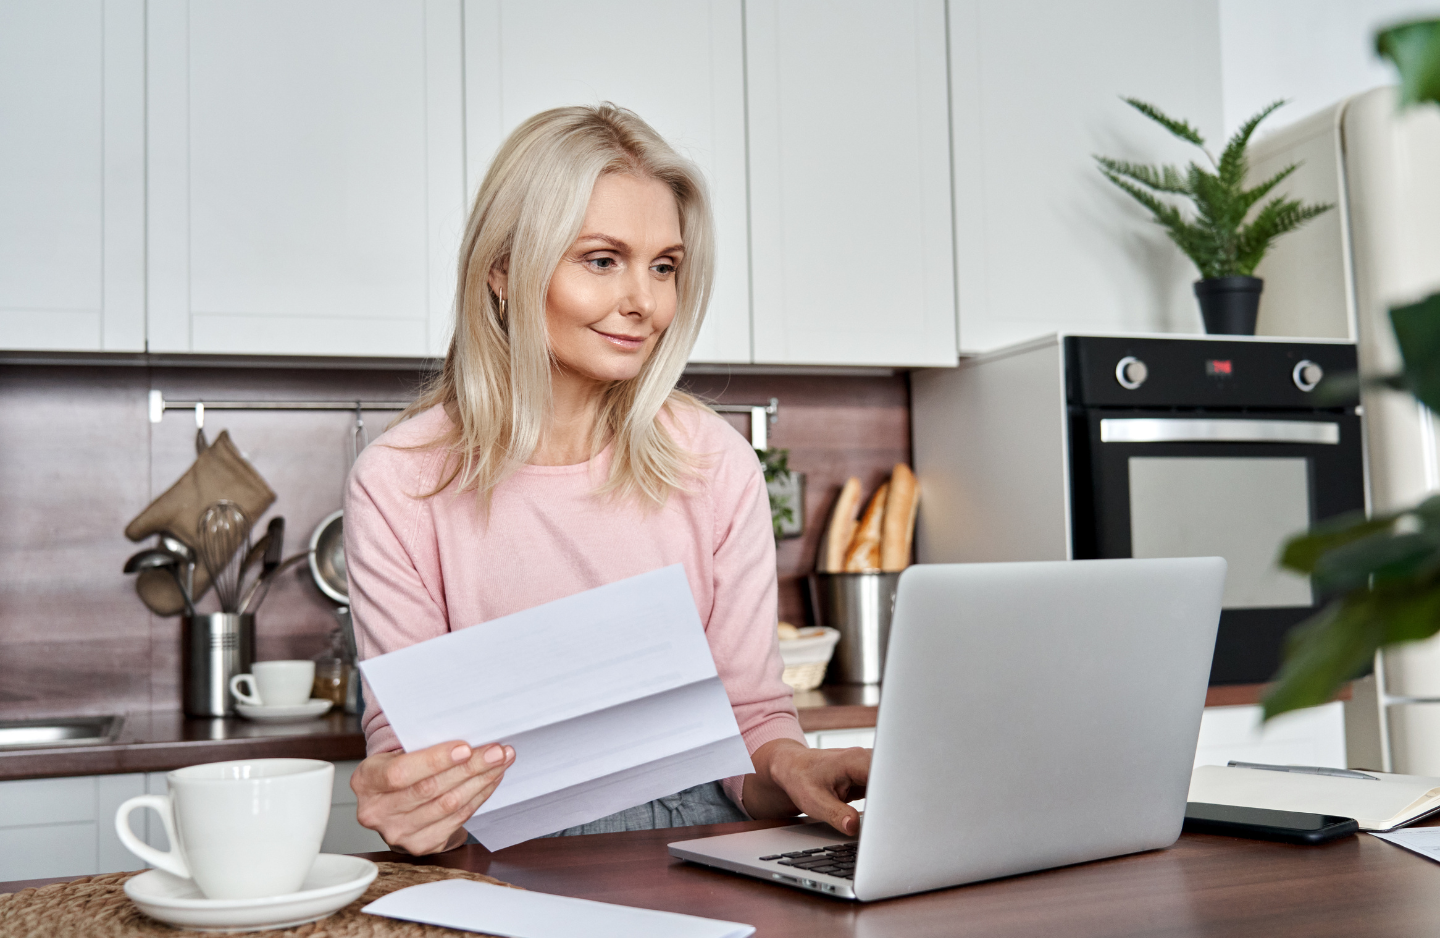 Woman sitting at counter looking at paper and laptop.